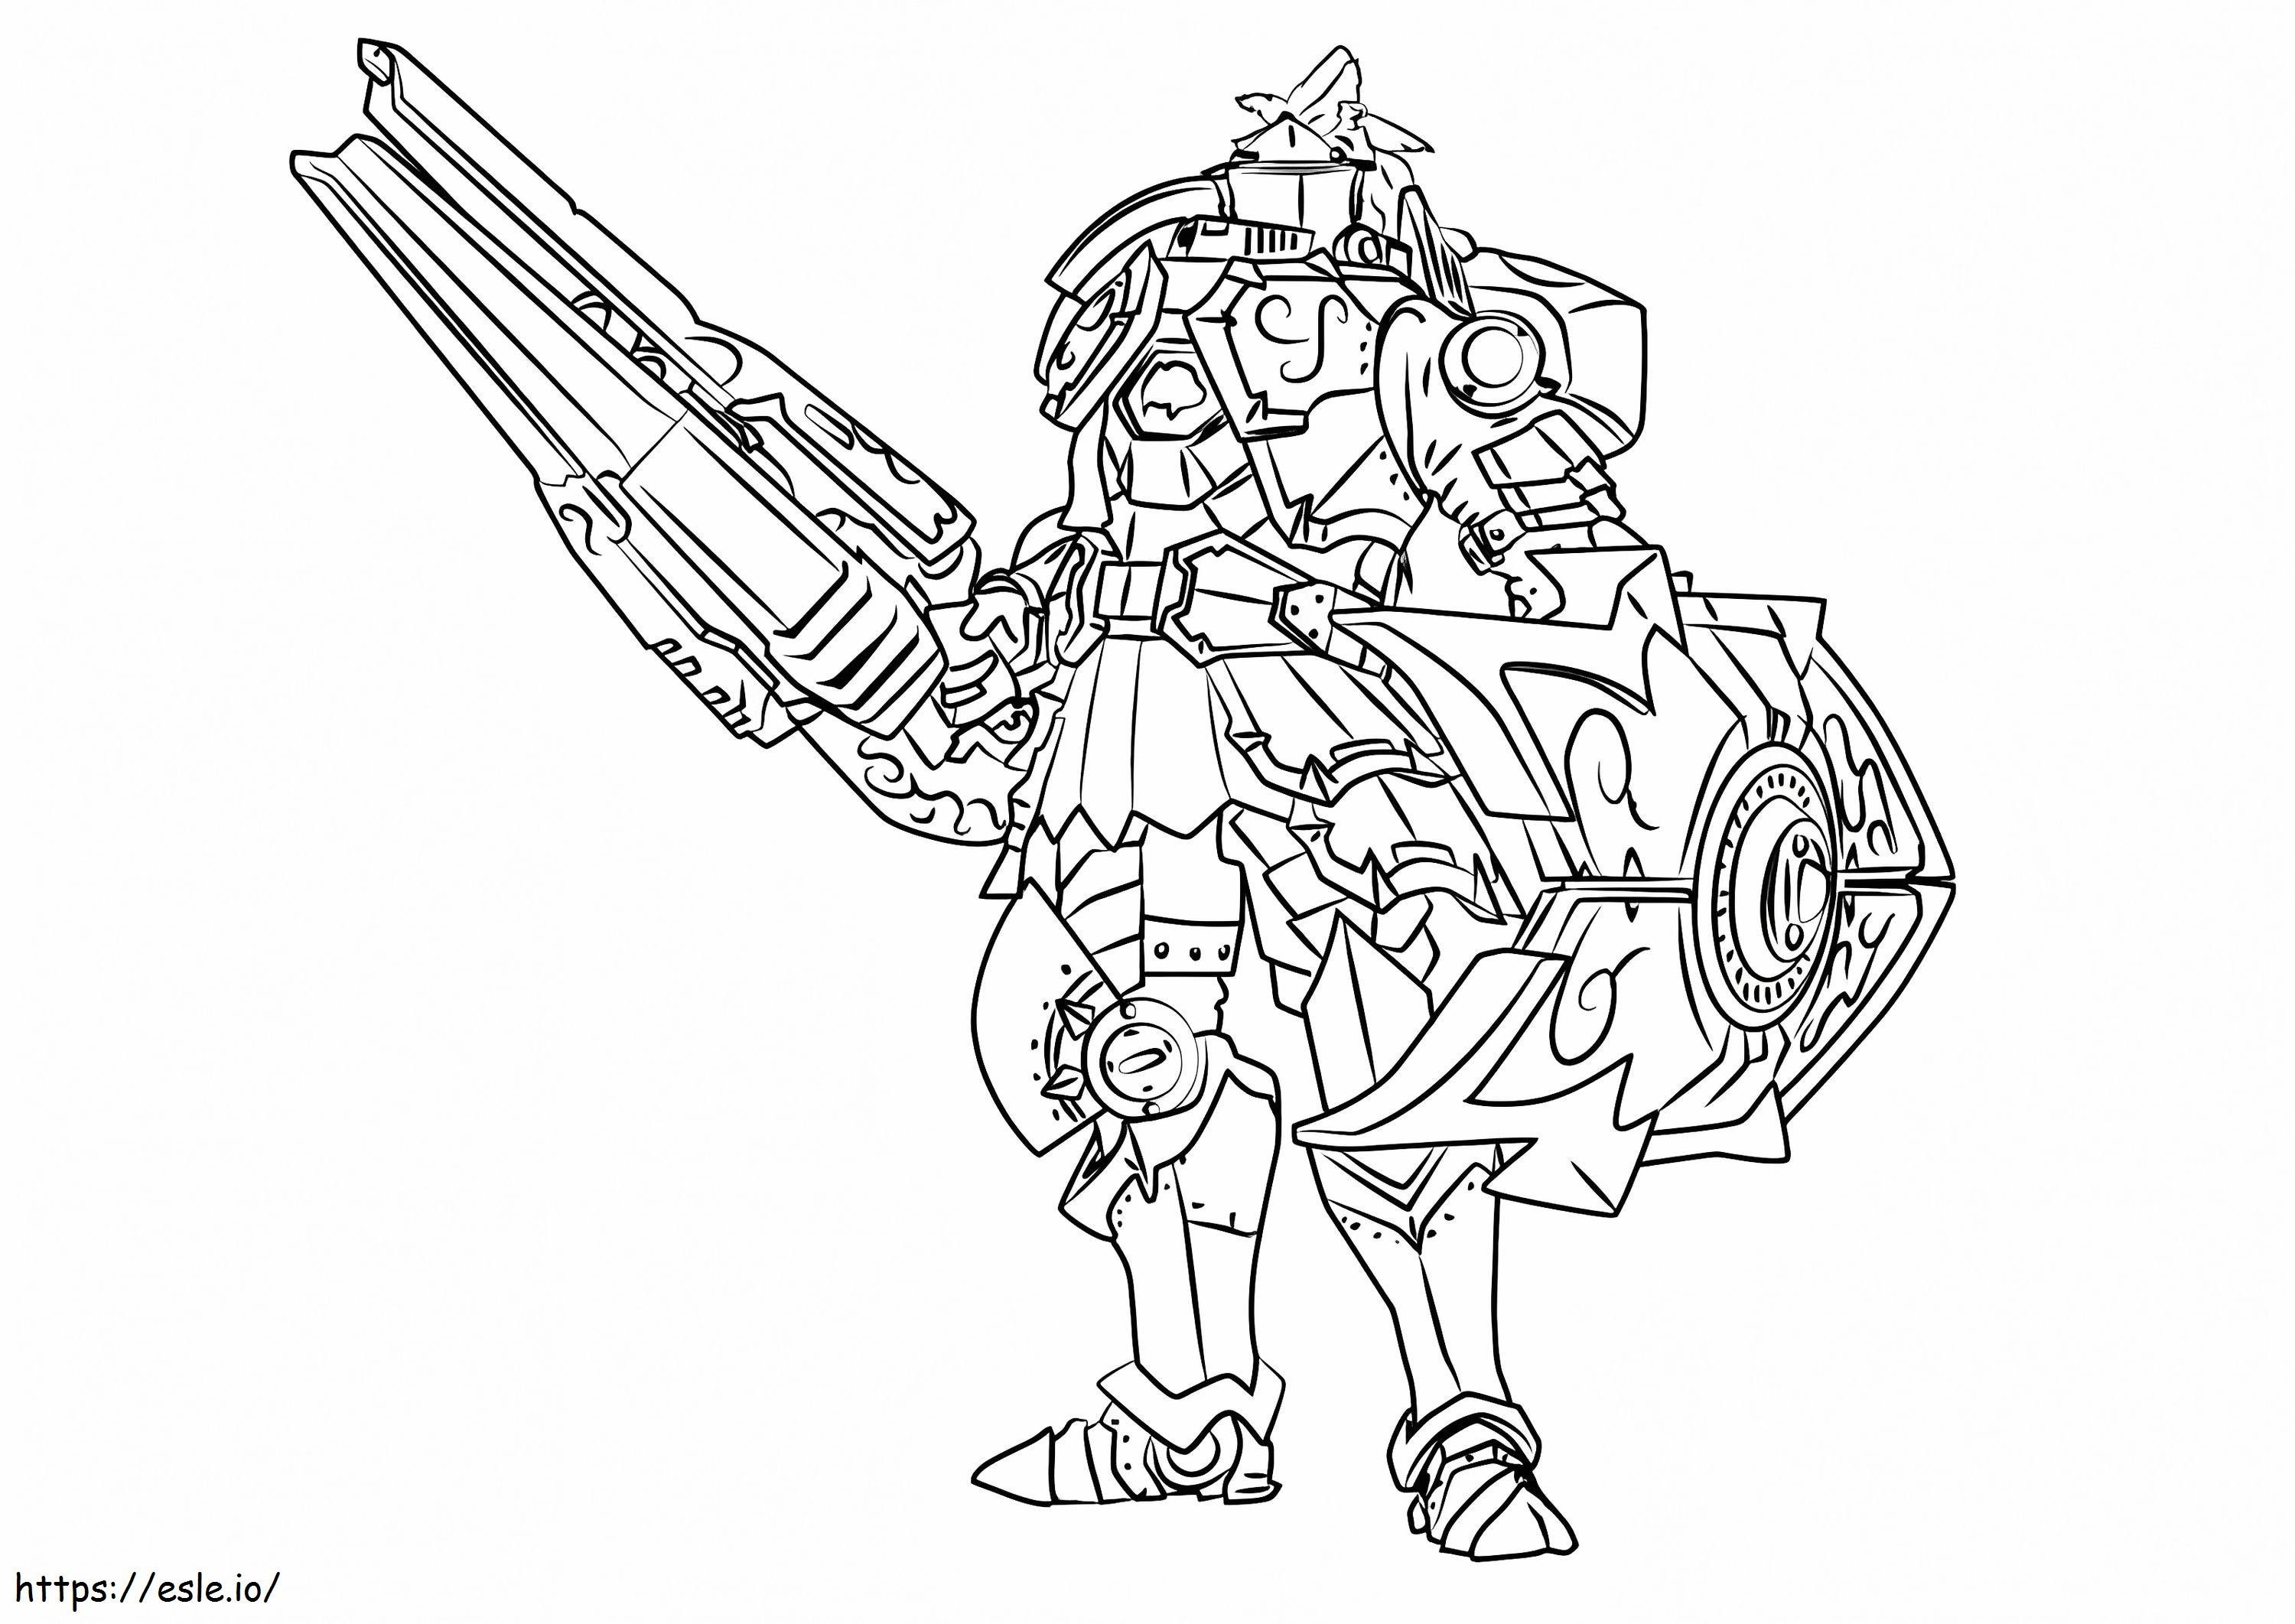 Fernando From Paladins coloring page